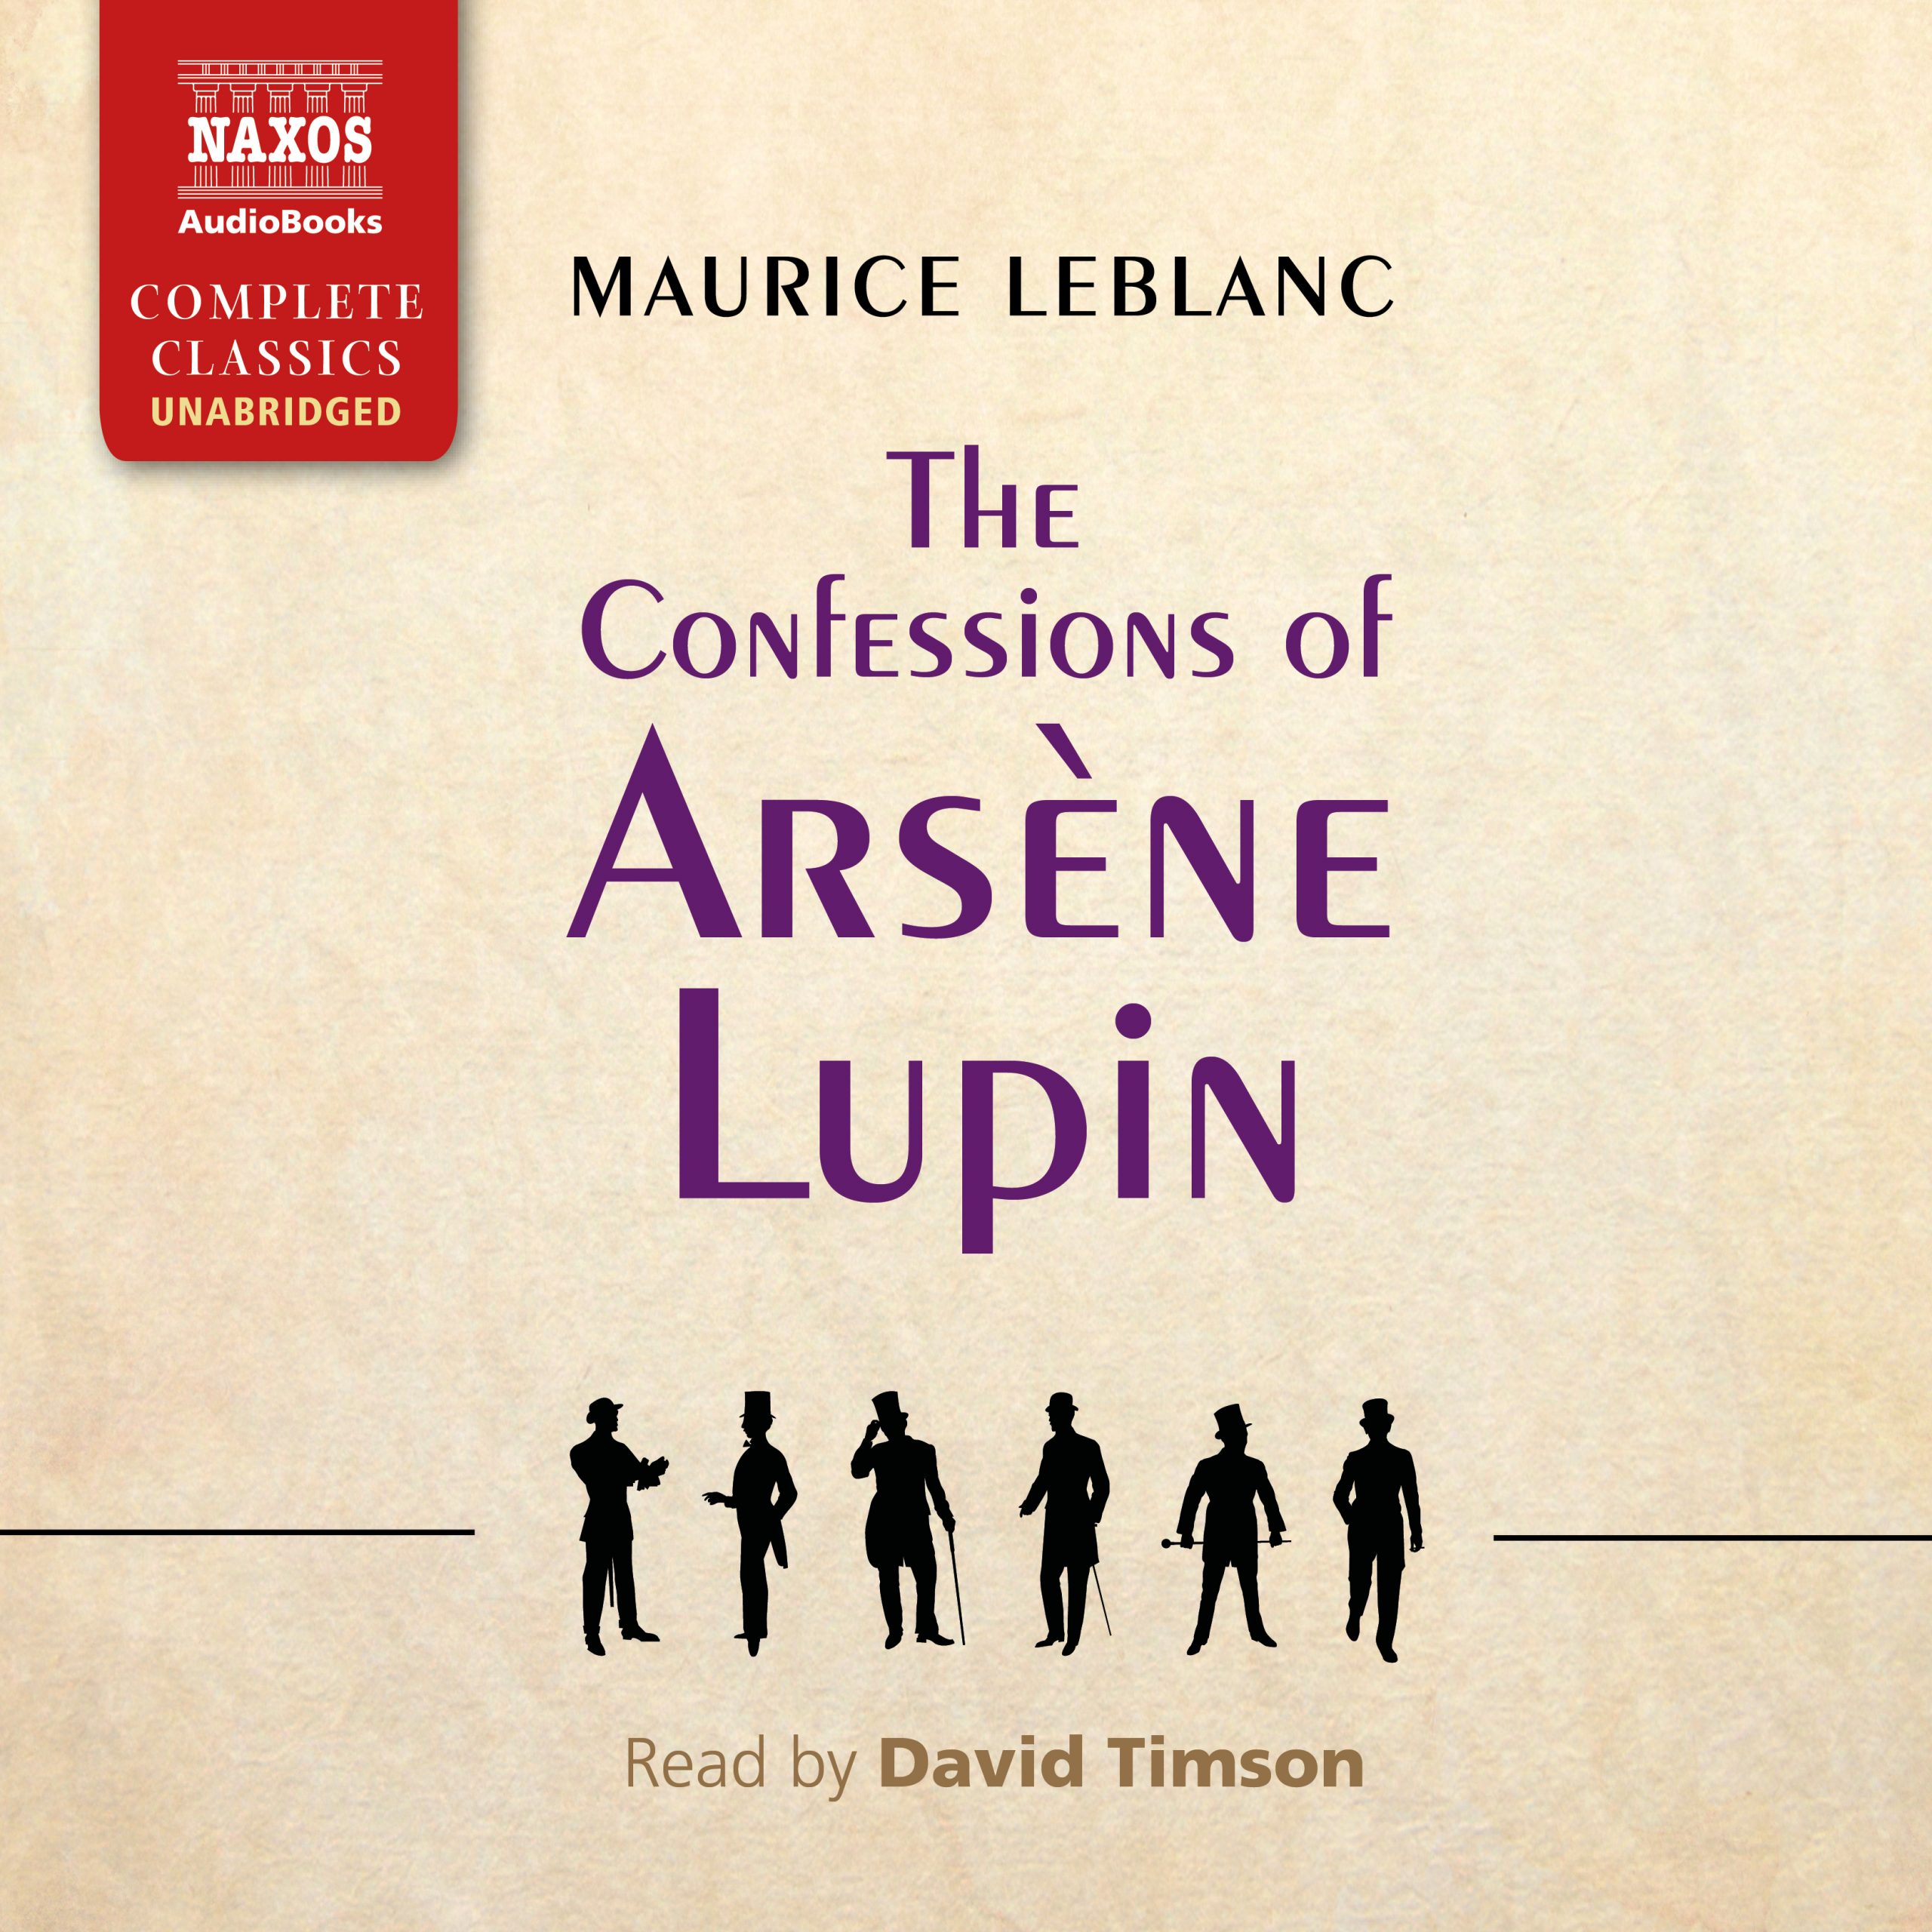 The Confessions of Arsène Lupin (unabridged)